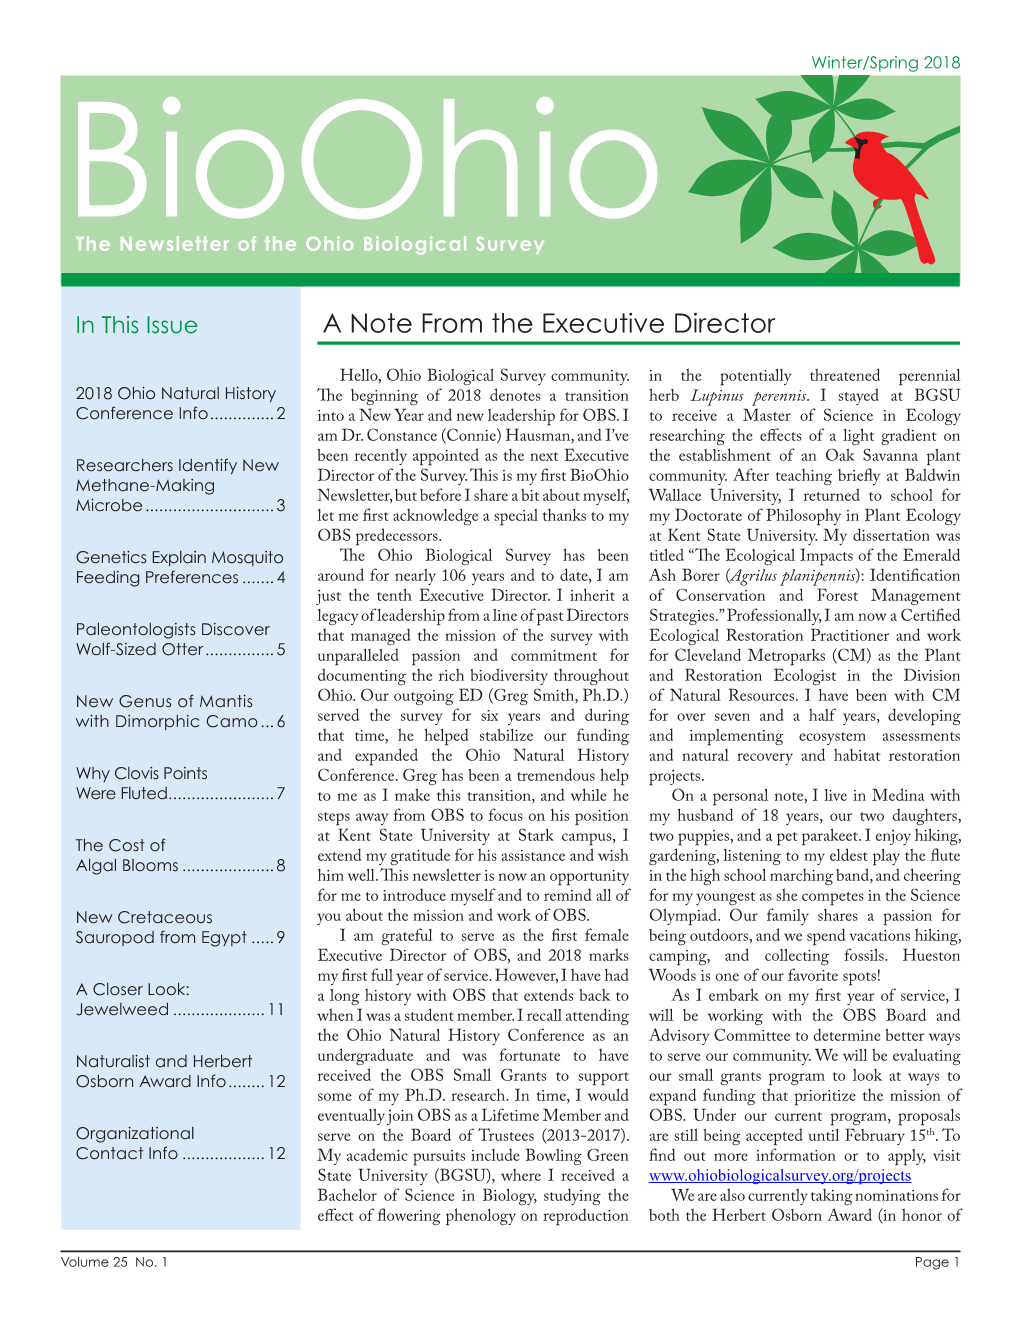 Winter/Spring 2018 Bioohio the Newsletter of the Ohio Biological Survey